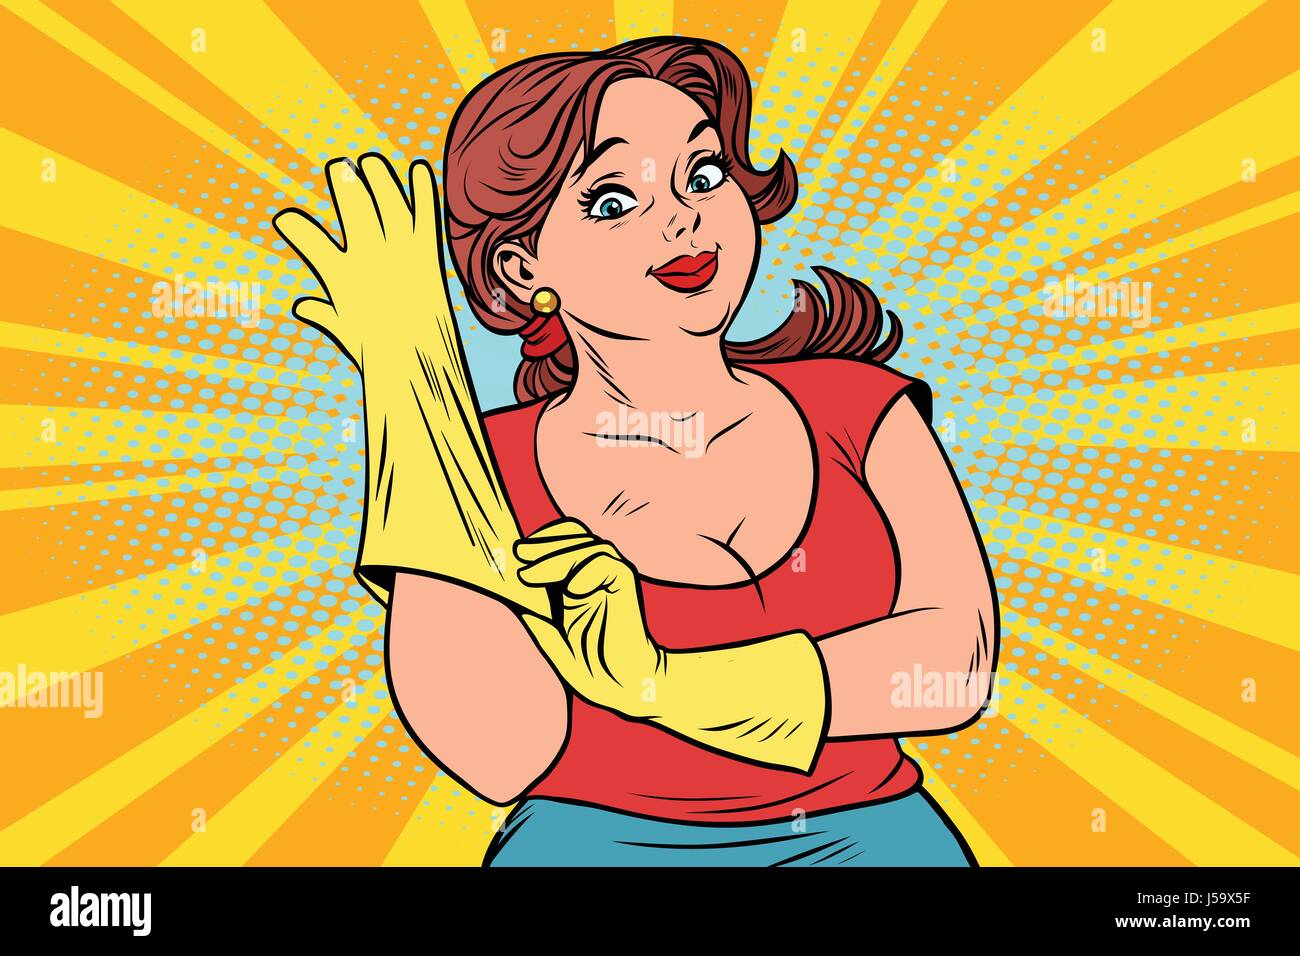 https://c8.alamy.com/comp/J59X5F/woman-in-rubber-gloves-cleaning-J59X5F.jpg